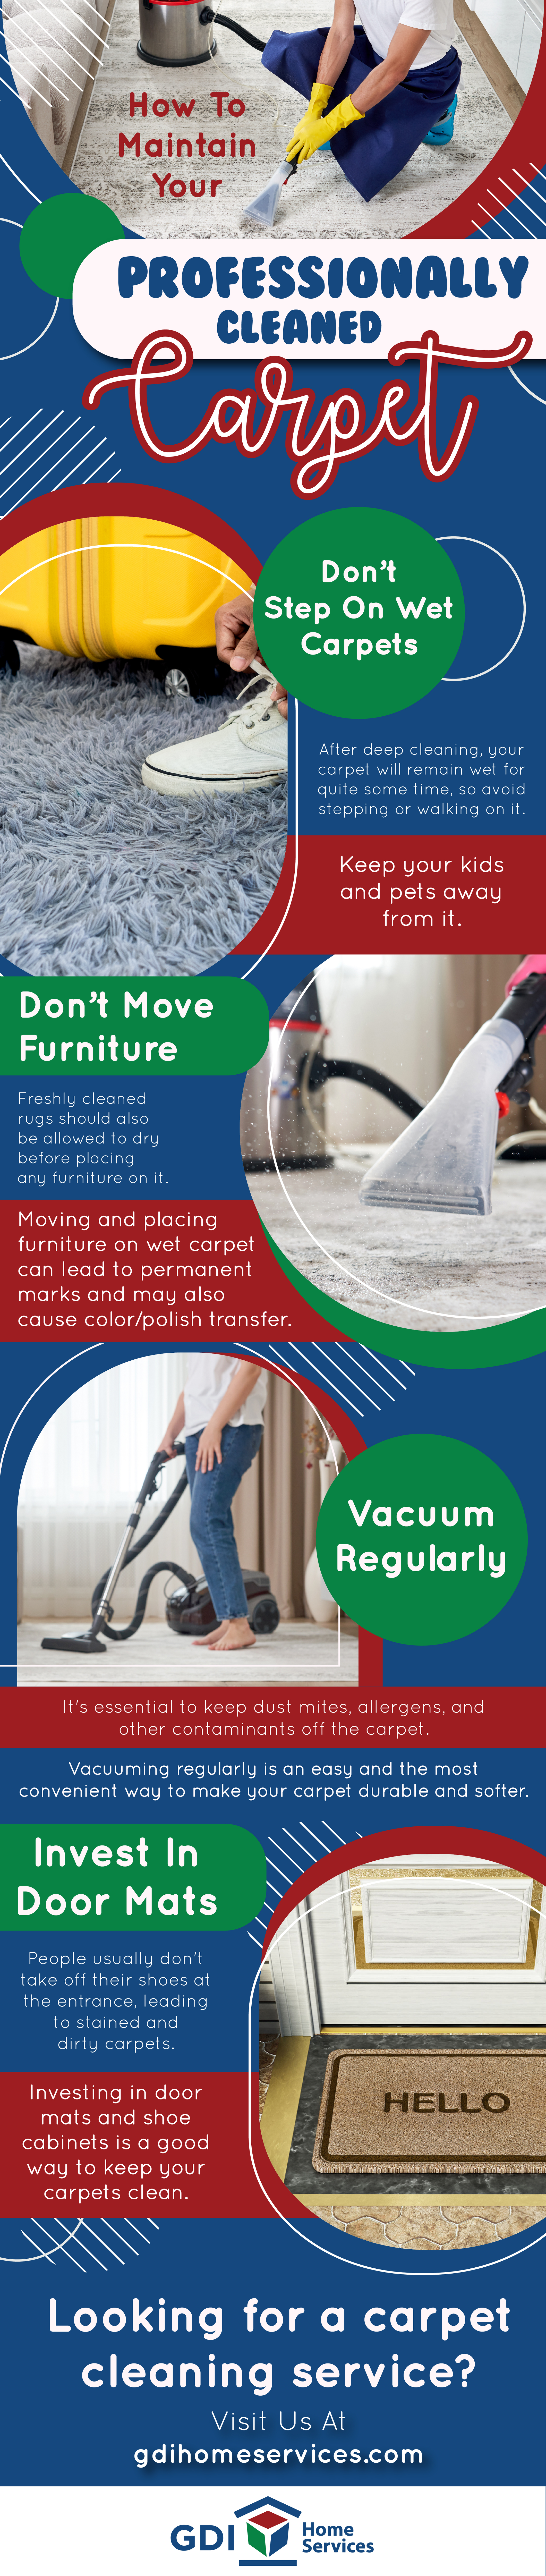 How To Maintain Your Professionally Cleaned Carpet? - Infograph